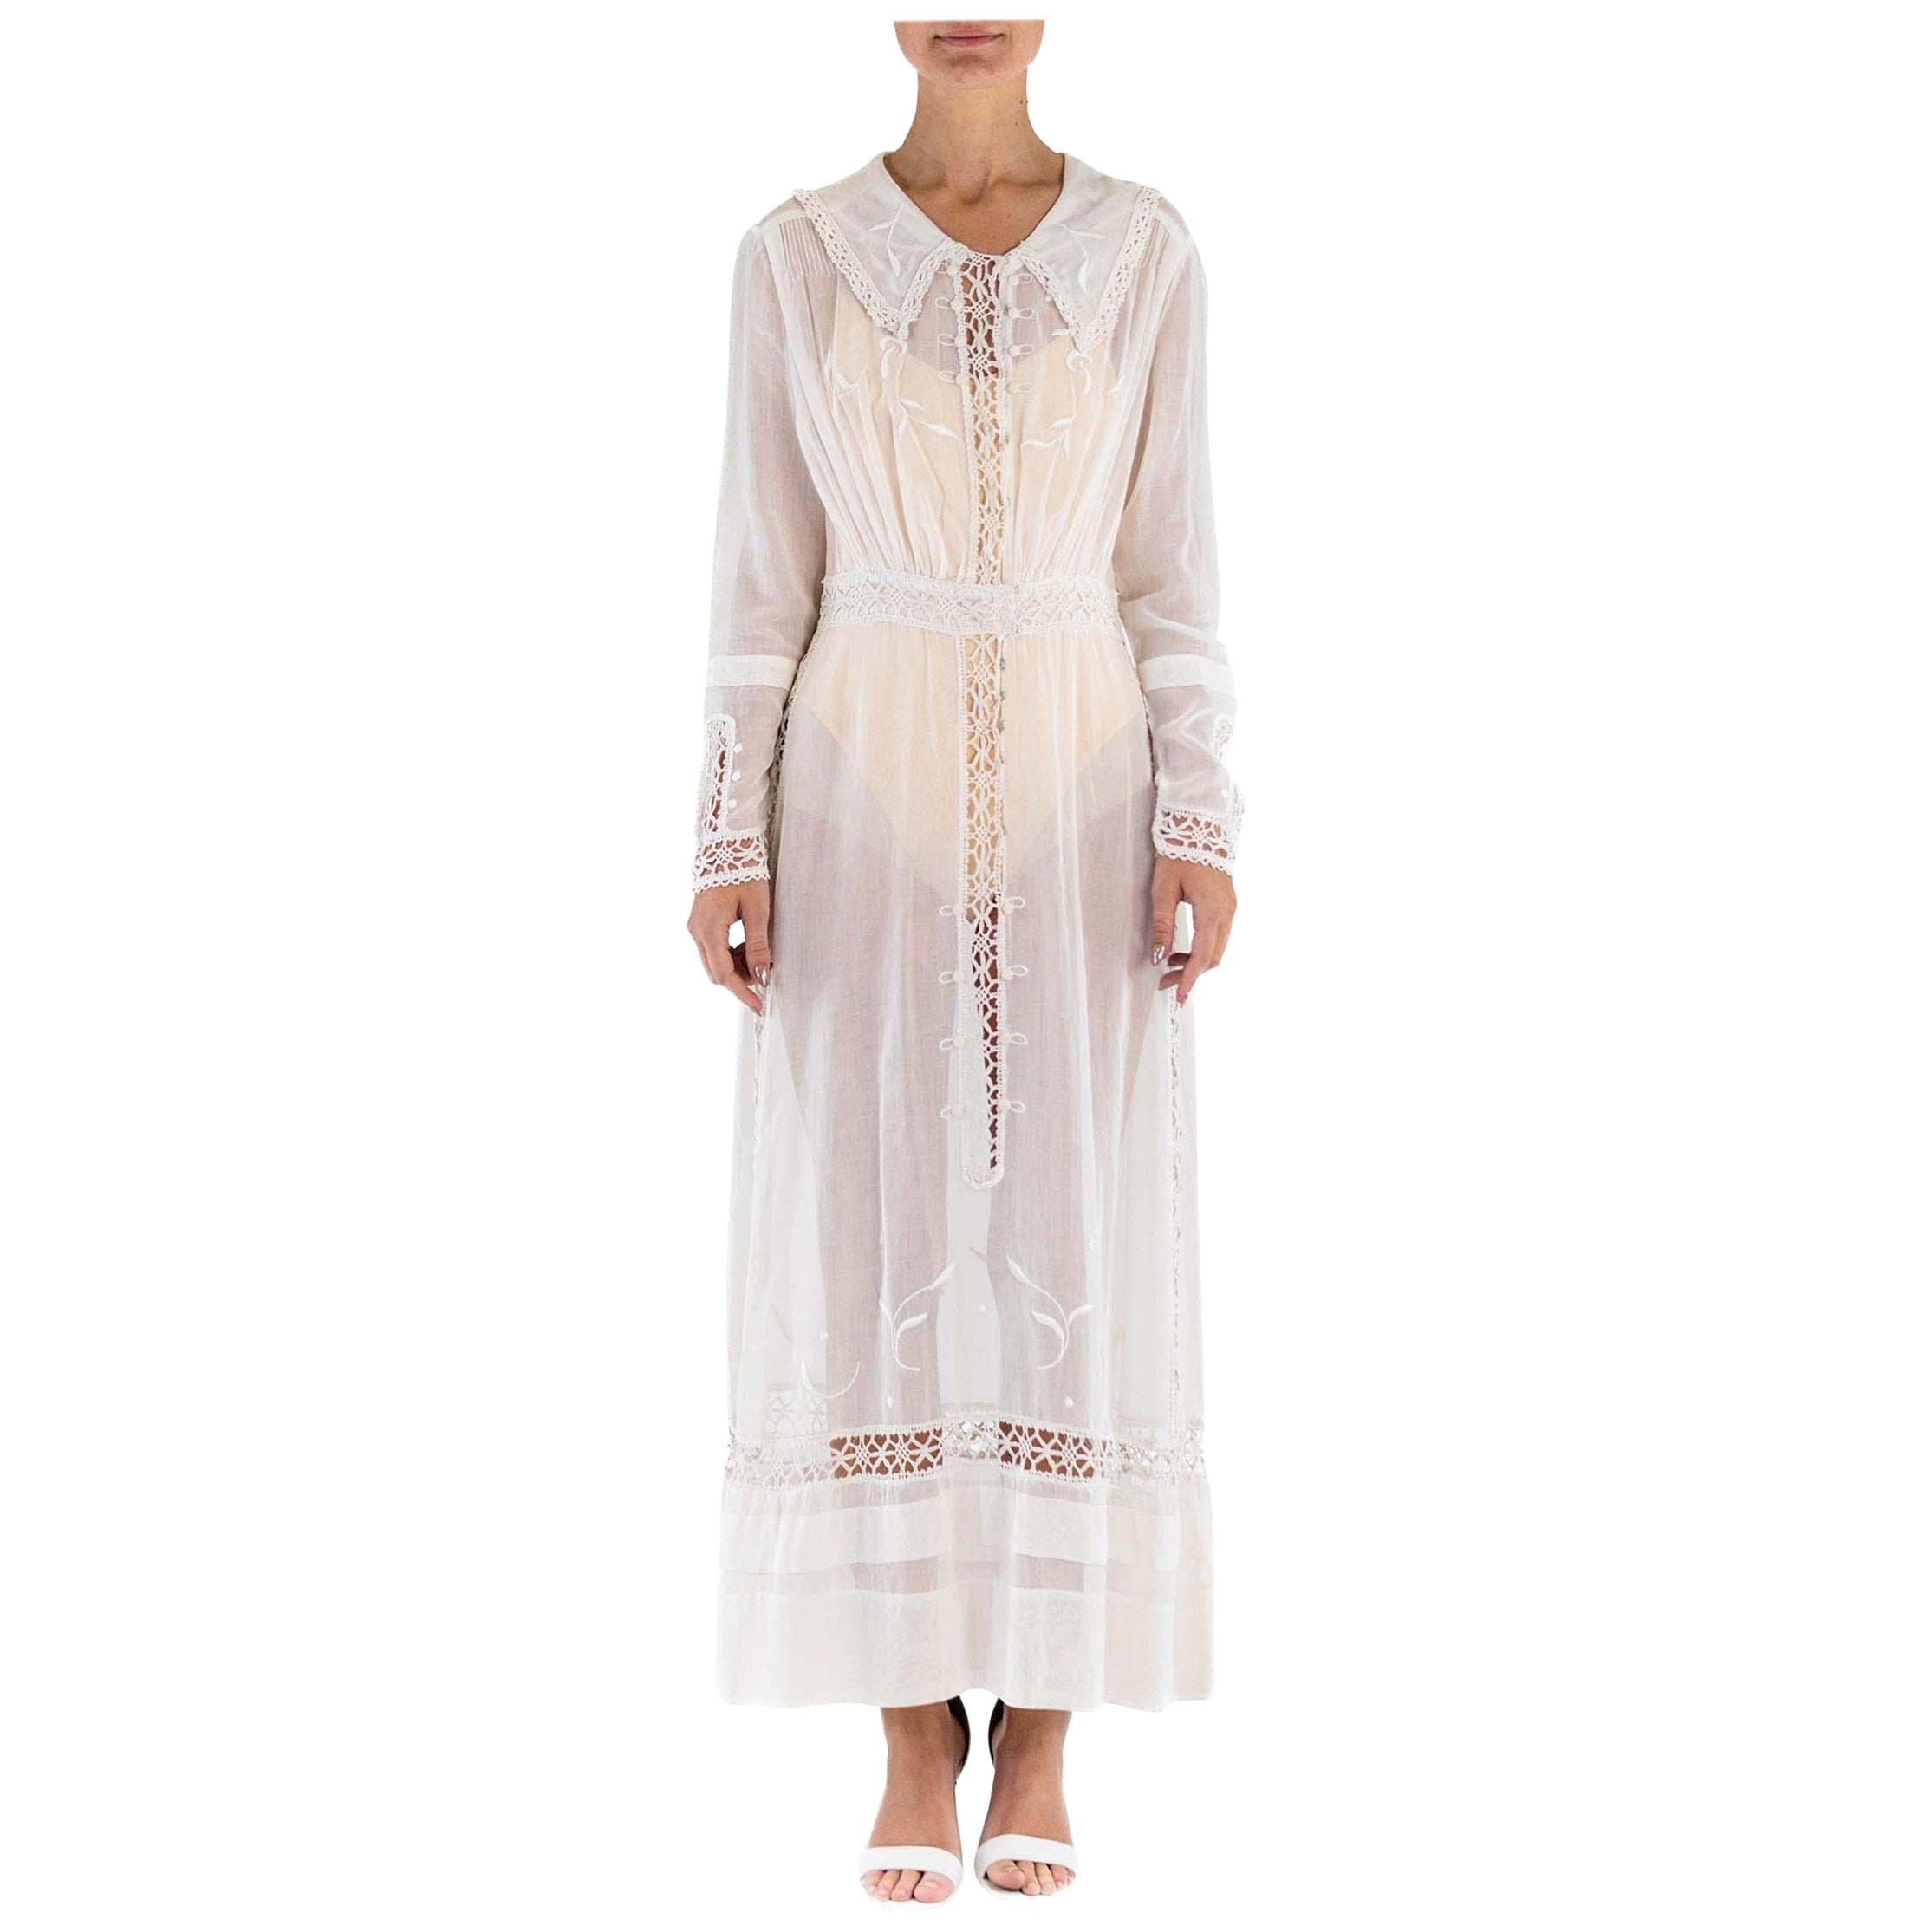 Edwardian White Organic Cotton Lace Sailor Collar Tea Dress With Sleeves For Sale